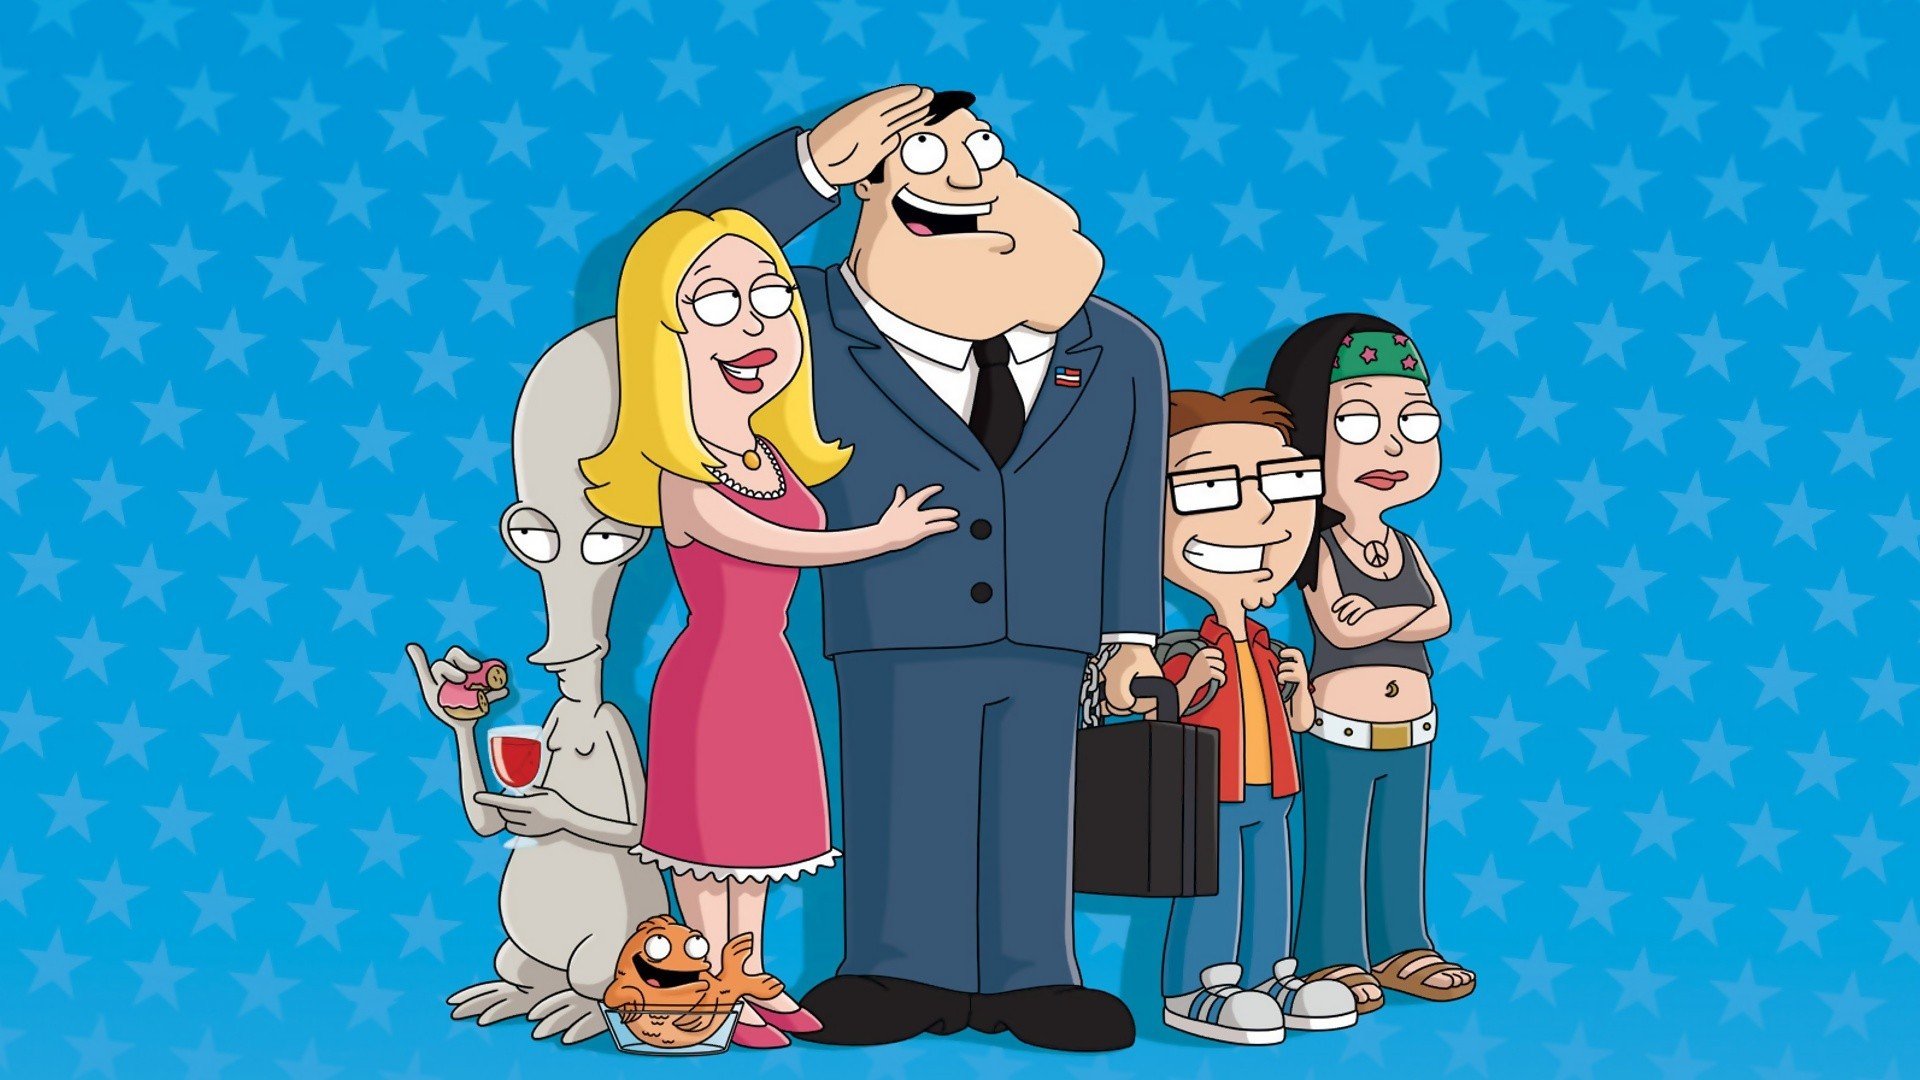 Download 1080p American Dad! desktop background ID:196251 for free